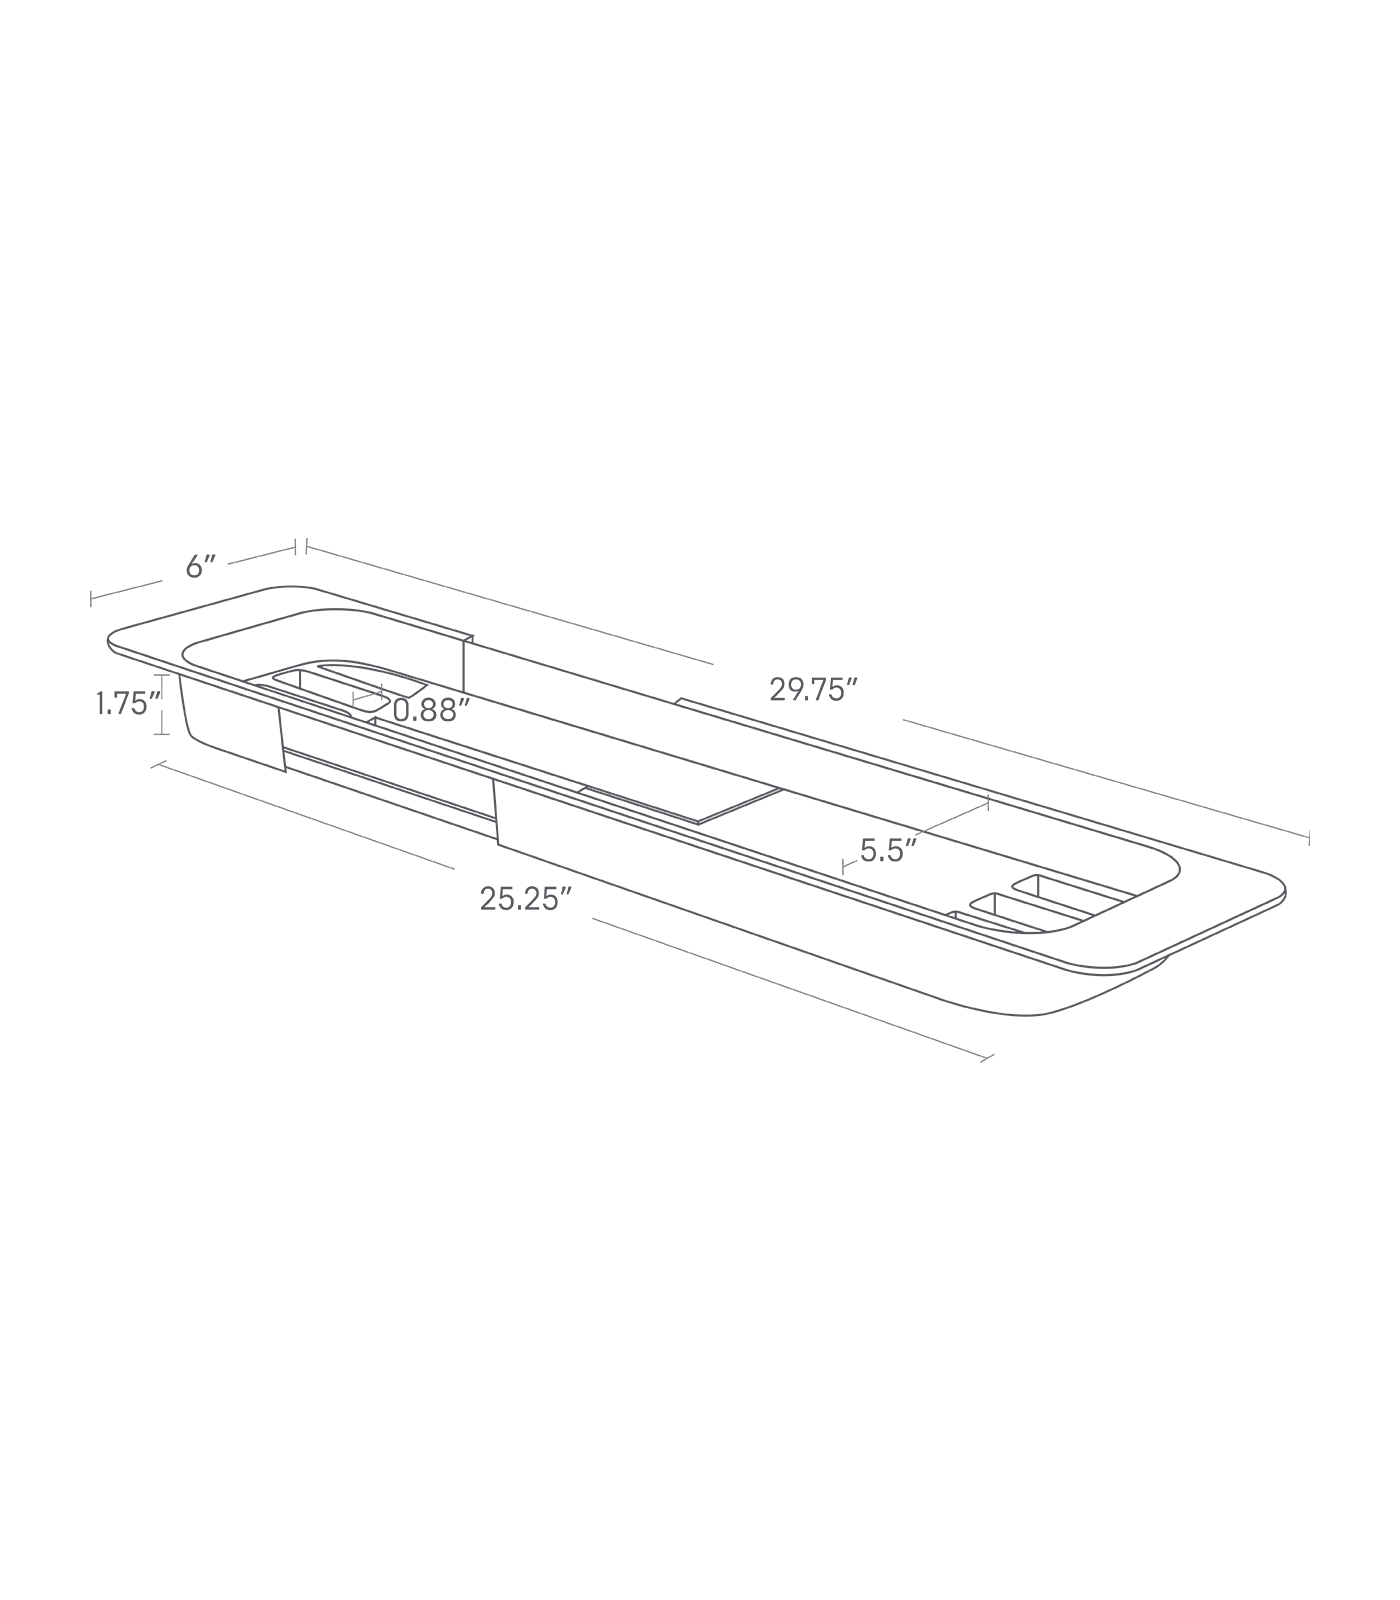 Dimension image for Expandable Bathtub Caddy showing a total length of 25.25